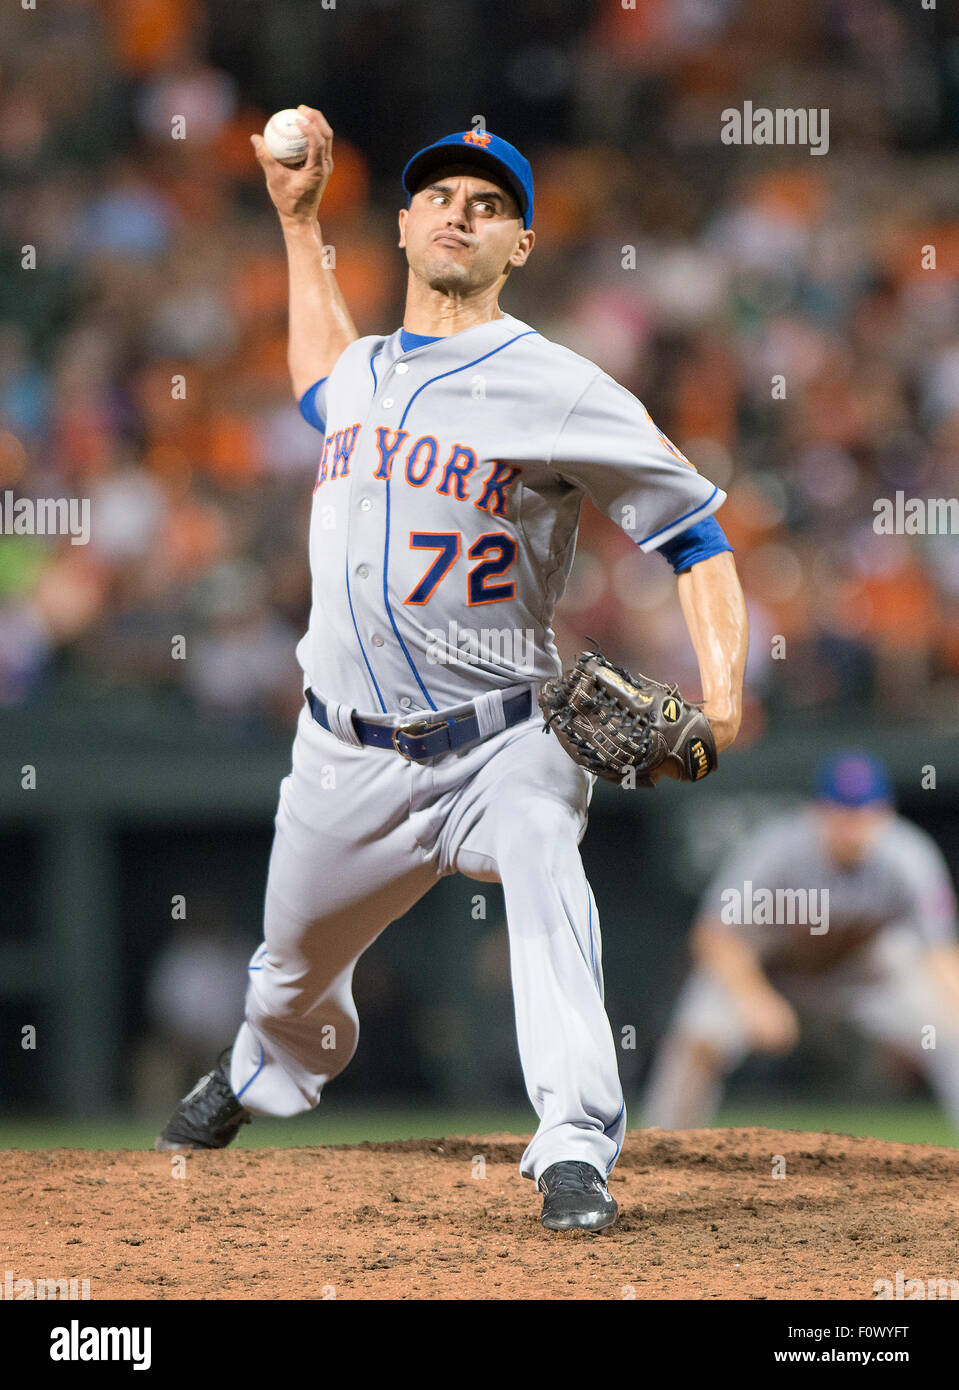 New York Mets relief pitcher Carlos Torres (72) pitches in the ninth inning against the Baltimore Orioles at Oriole Park at Camden Yards in Baltimore, Maryland on Wednesday, August 19, 2015. The Orioles won the game 5 - 4. Credit: Ron Sachs/CNP (RESTRICTION: NO New York or New Jersey Newspapers or newspapers within a 75 mile radius of New York City) - NO WIRE SERVICE - Stock Photo